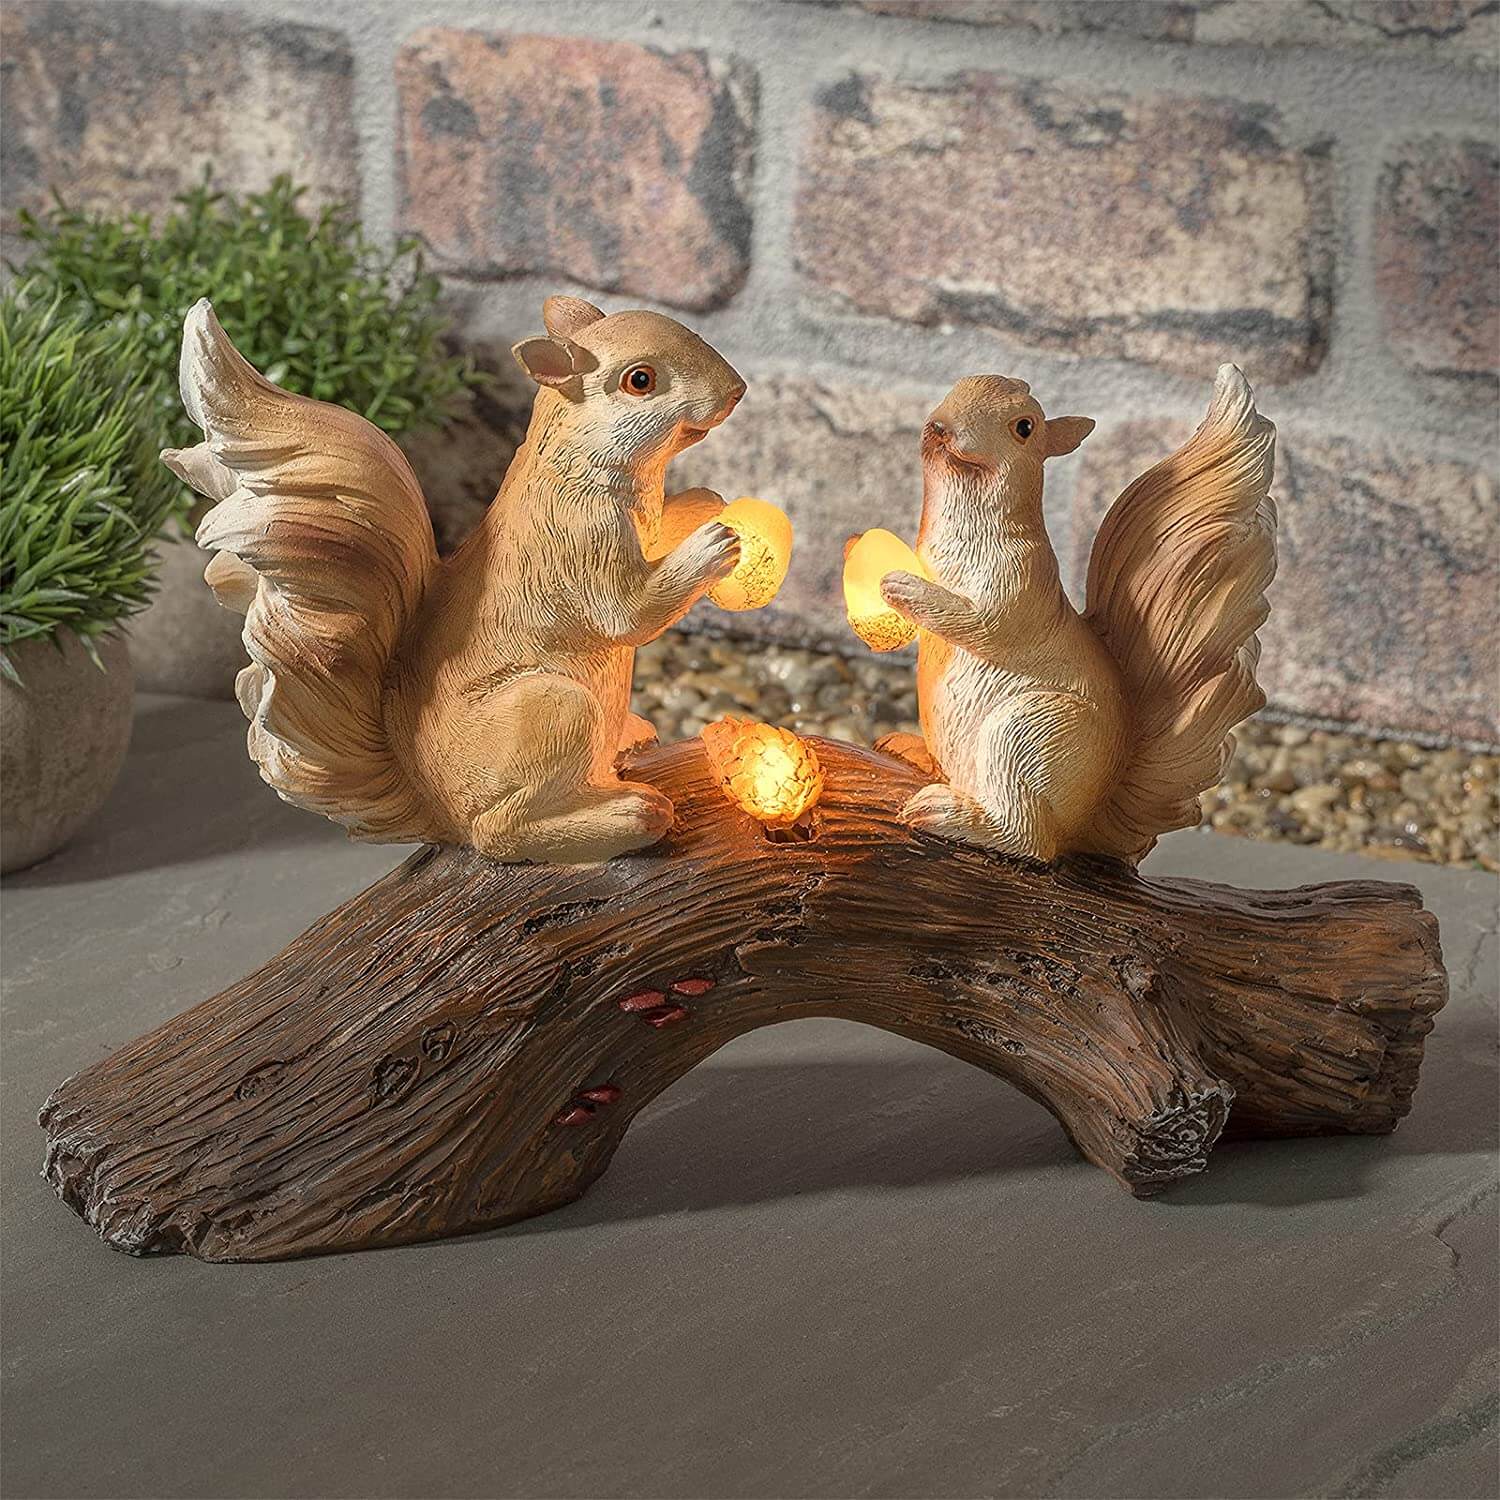 SA Products Squirrel Ornament Solar-powered LED Lights